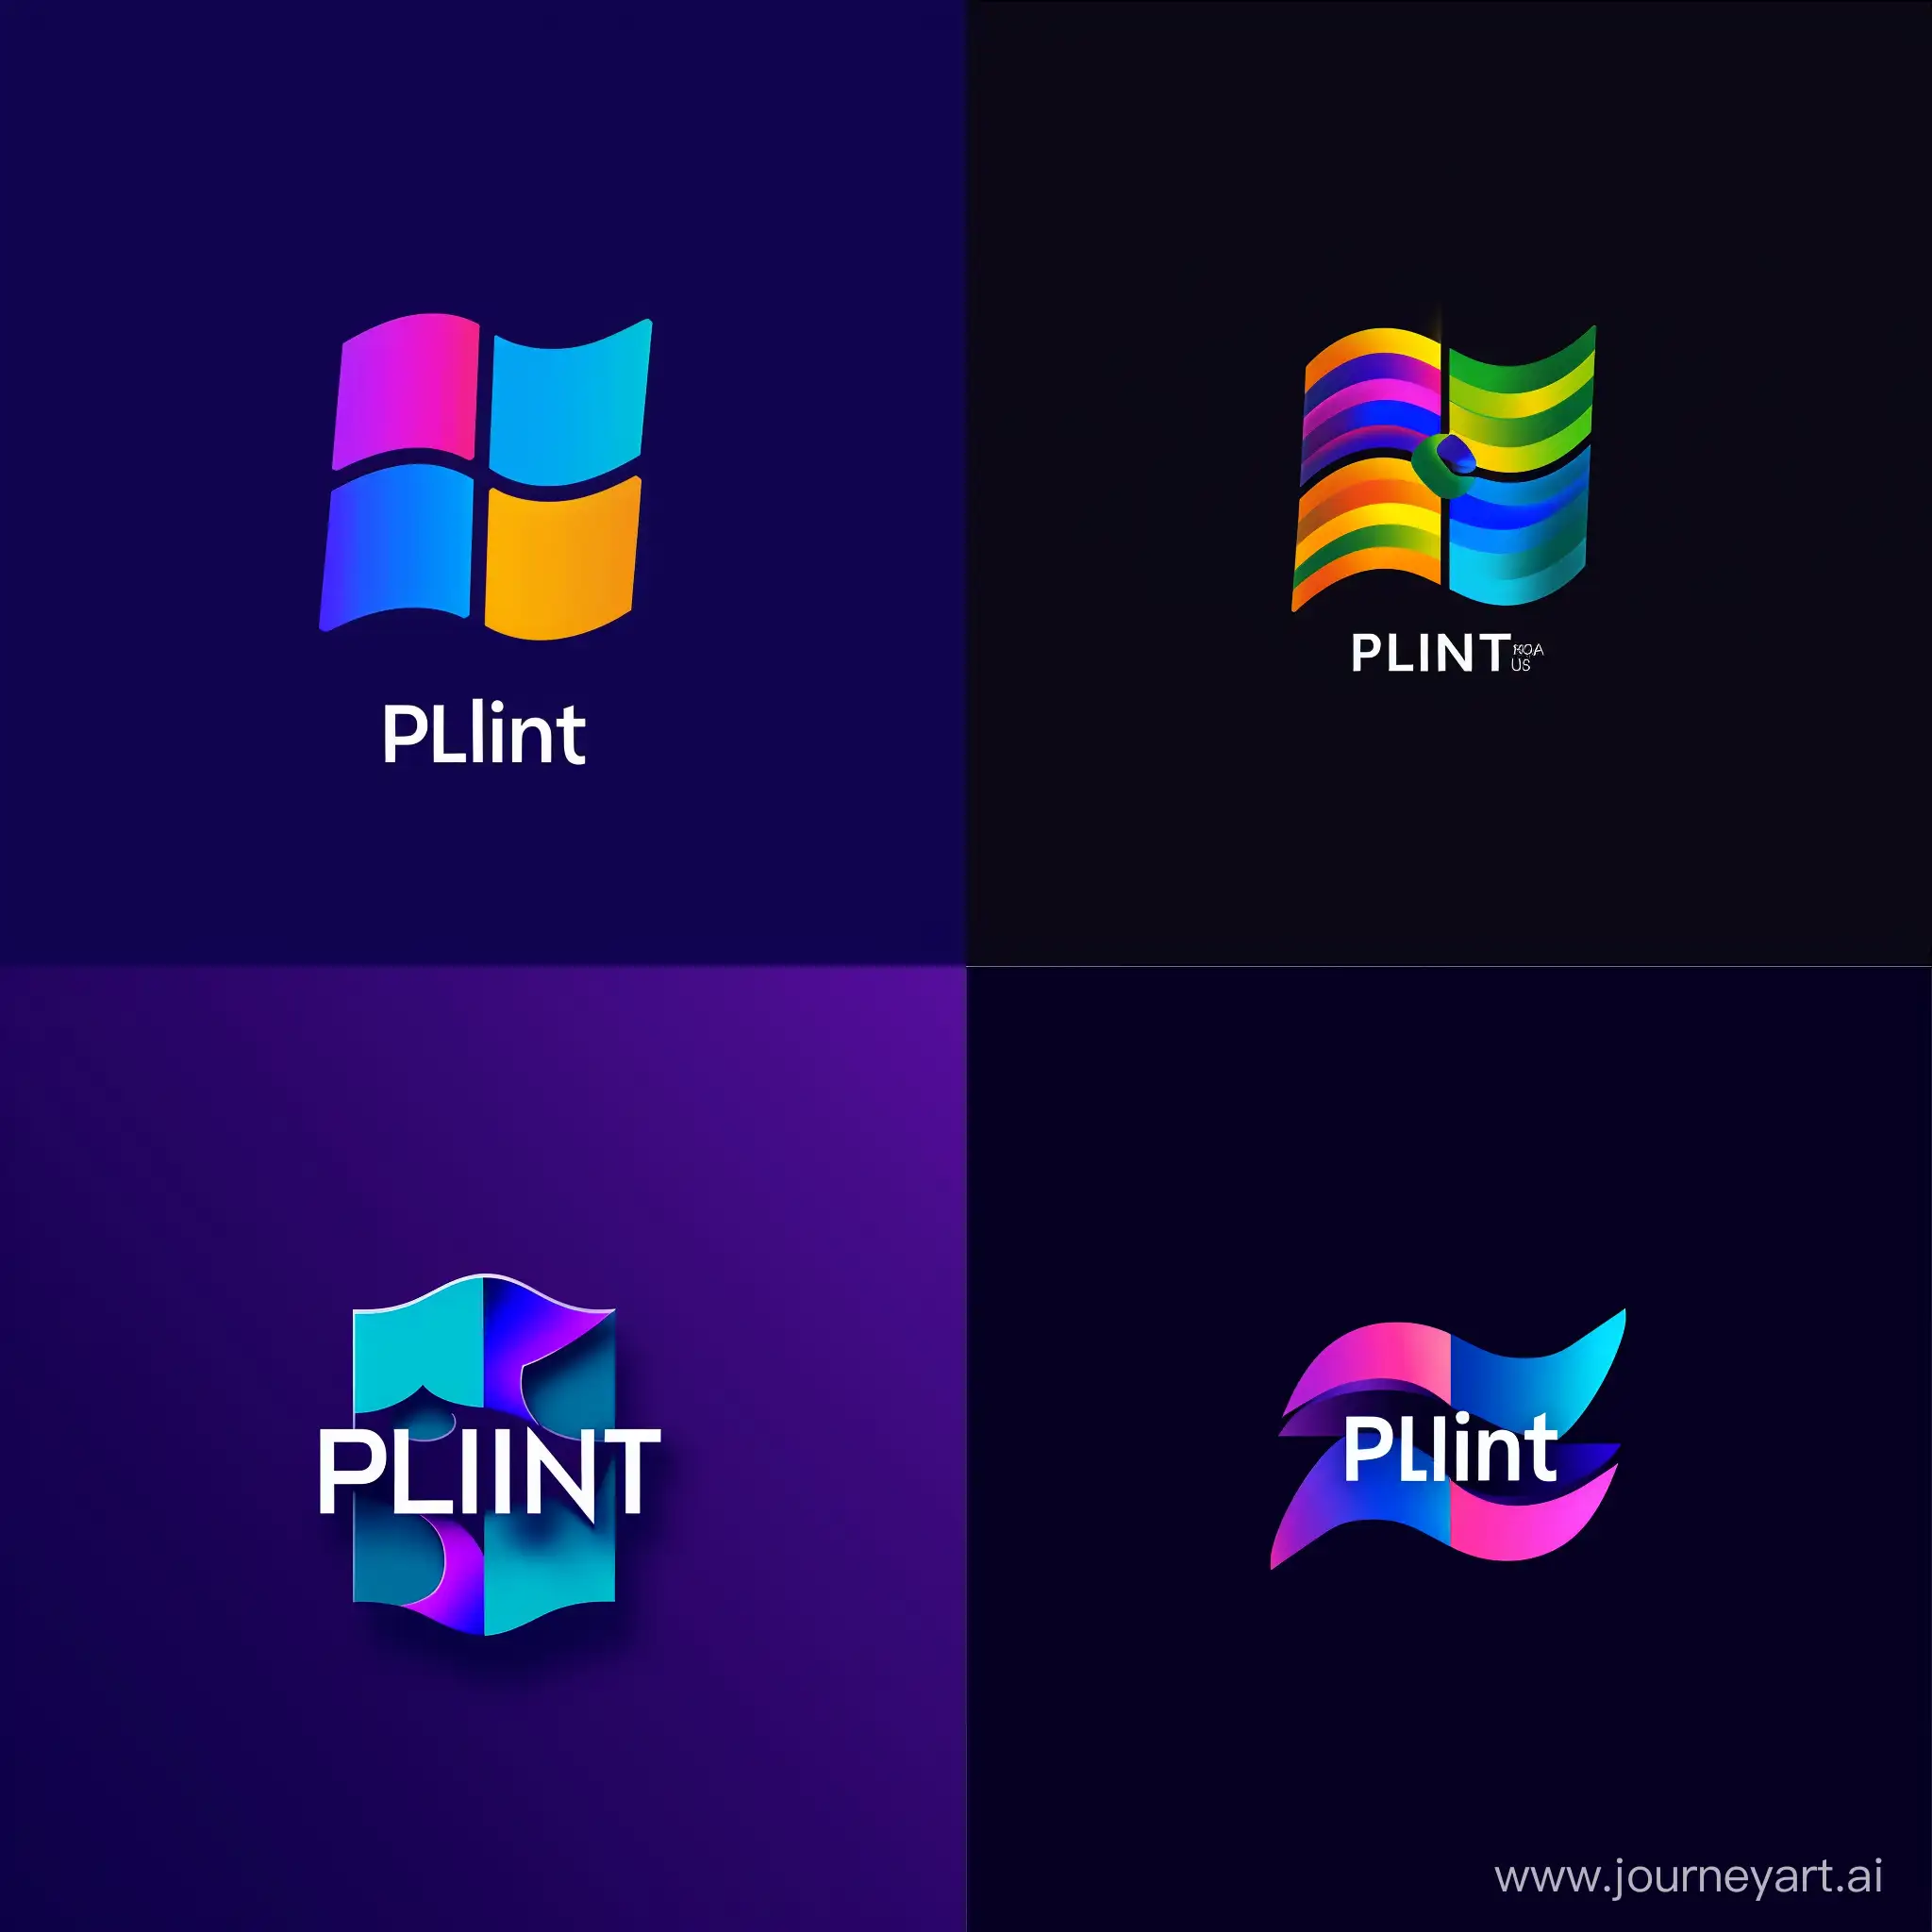 Beautiful logo associated with reliability Plint us VPN in Microsoft's Fluent Design without text in the images, minimalistic style like word icons, logos simplicity